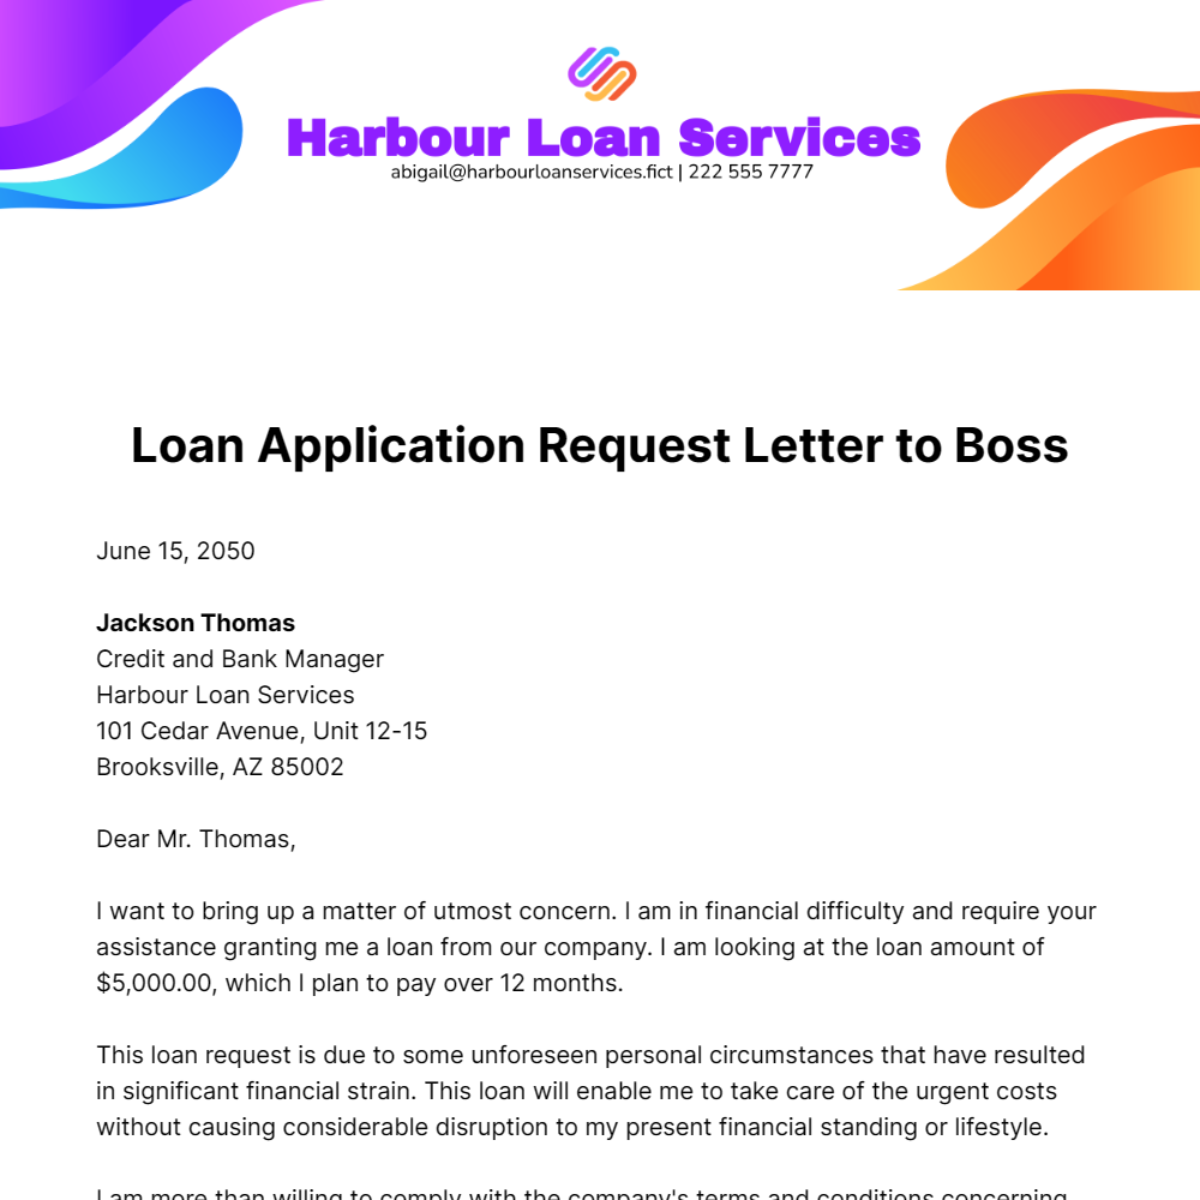 Loan Application Request Letter to Boss Template